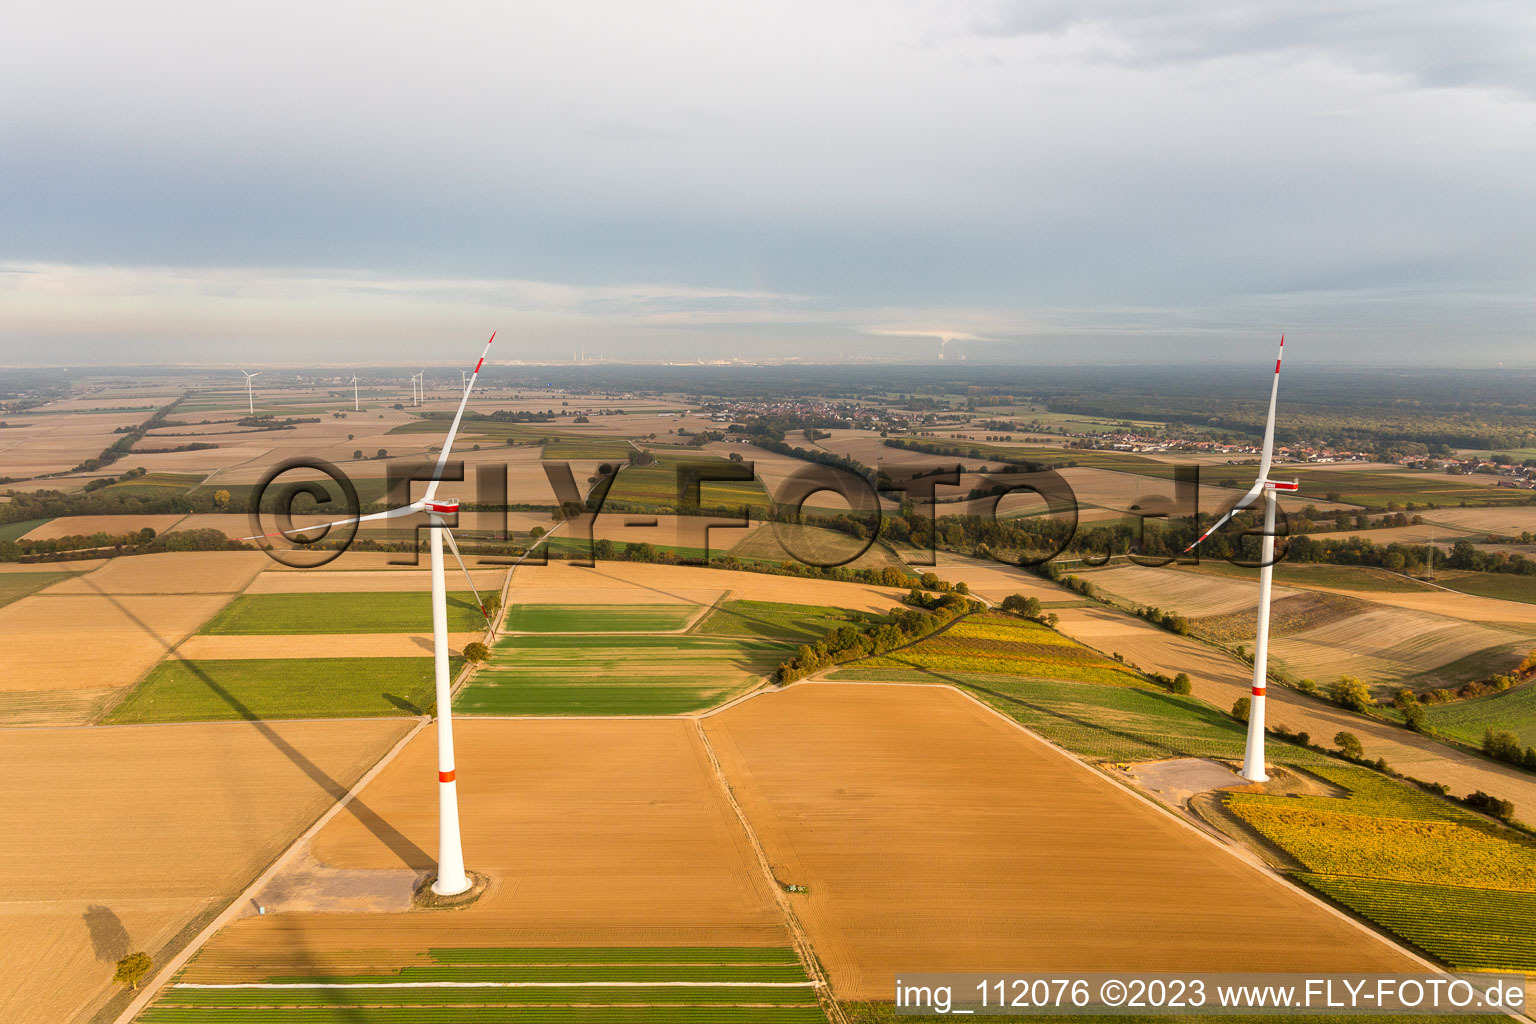 Drone recording of EnBW wind farm - wind turbine with 6 wind turbines in Freckenfeld in the state Rhineland-Palatinate, Germany